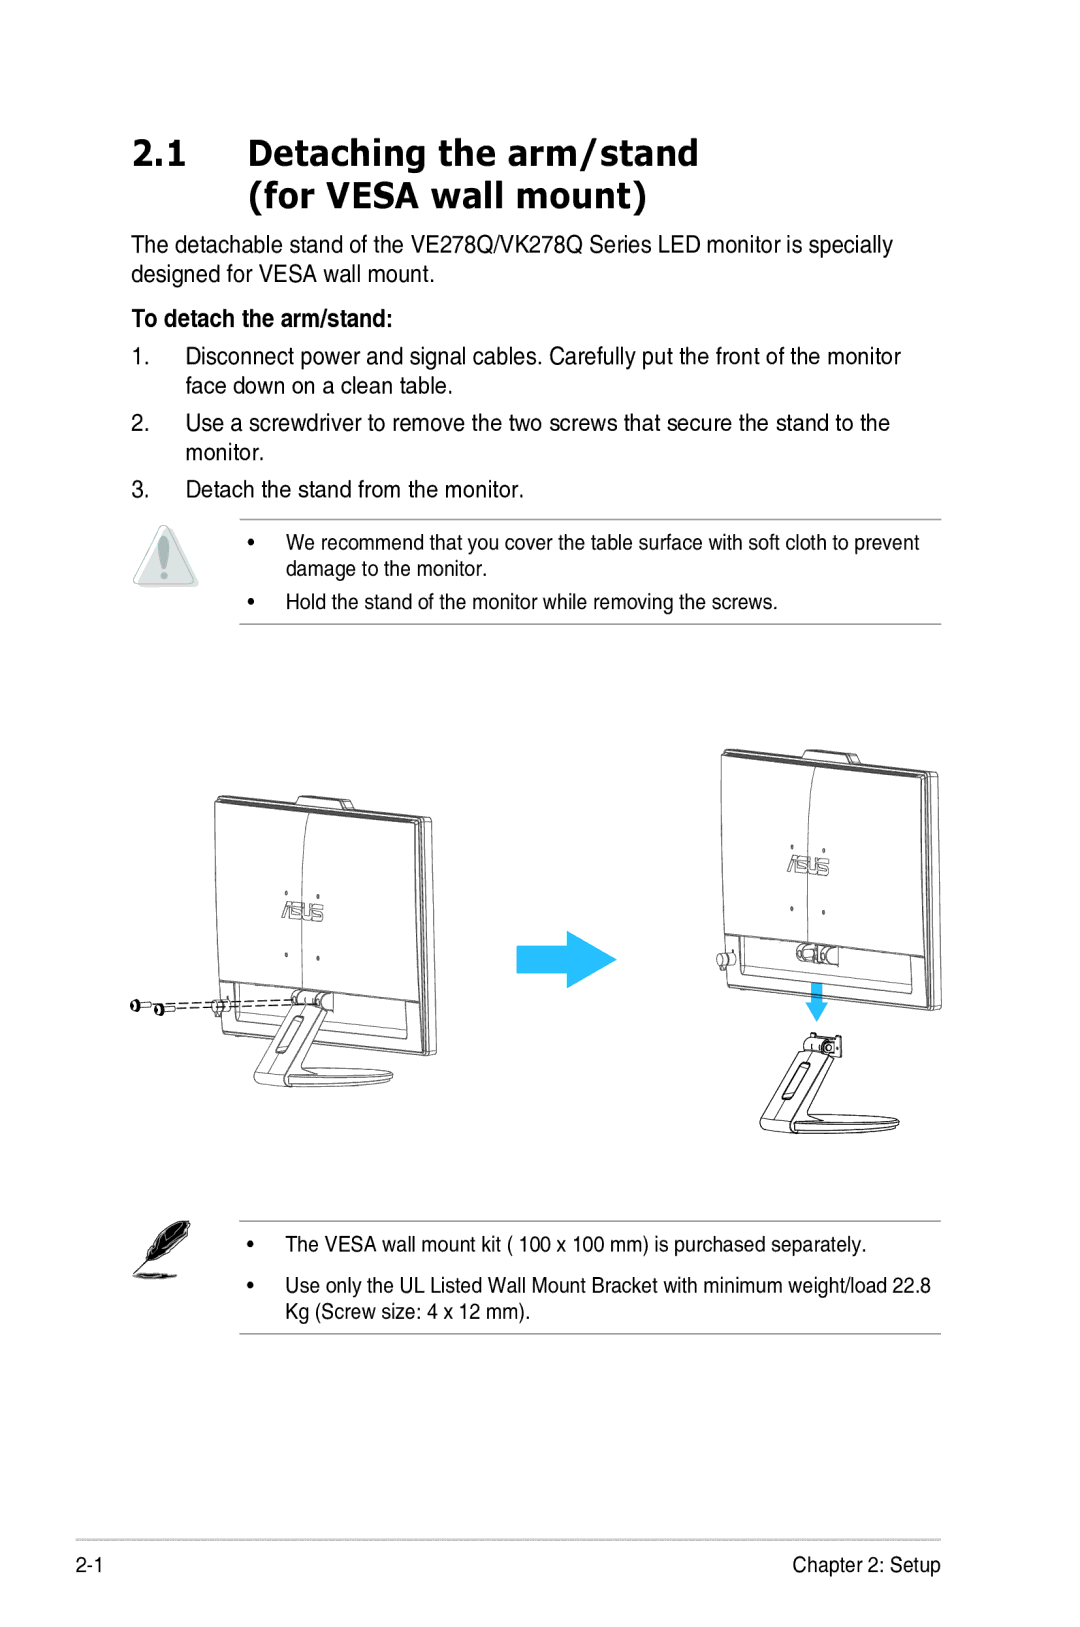 Asus VE278Q, 90LMB5101T11081C, VK278Q manual Detaching the arm/stand for Vesa wall mount, To detach the arm/stand 